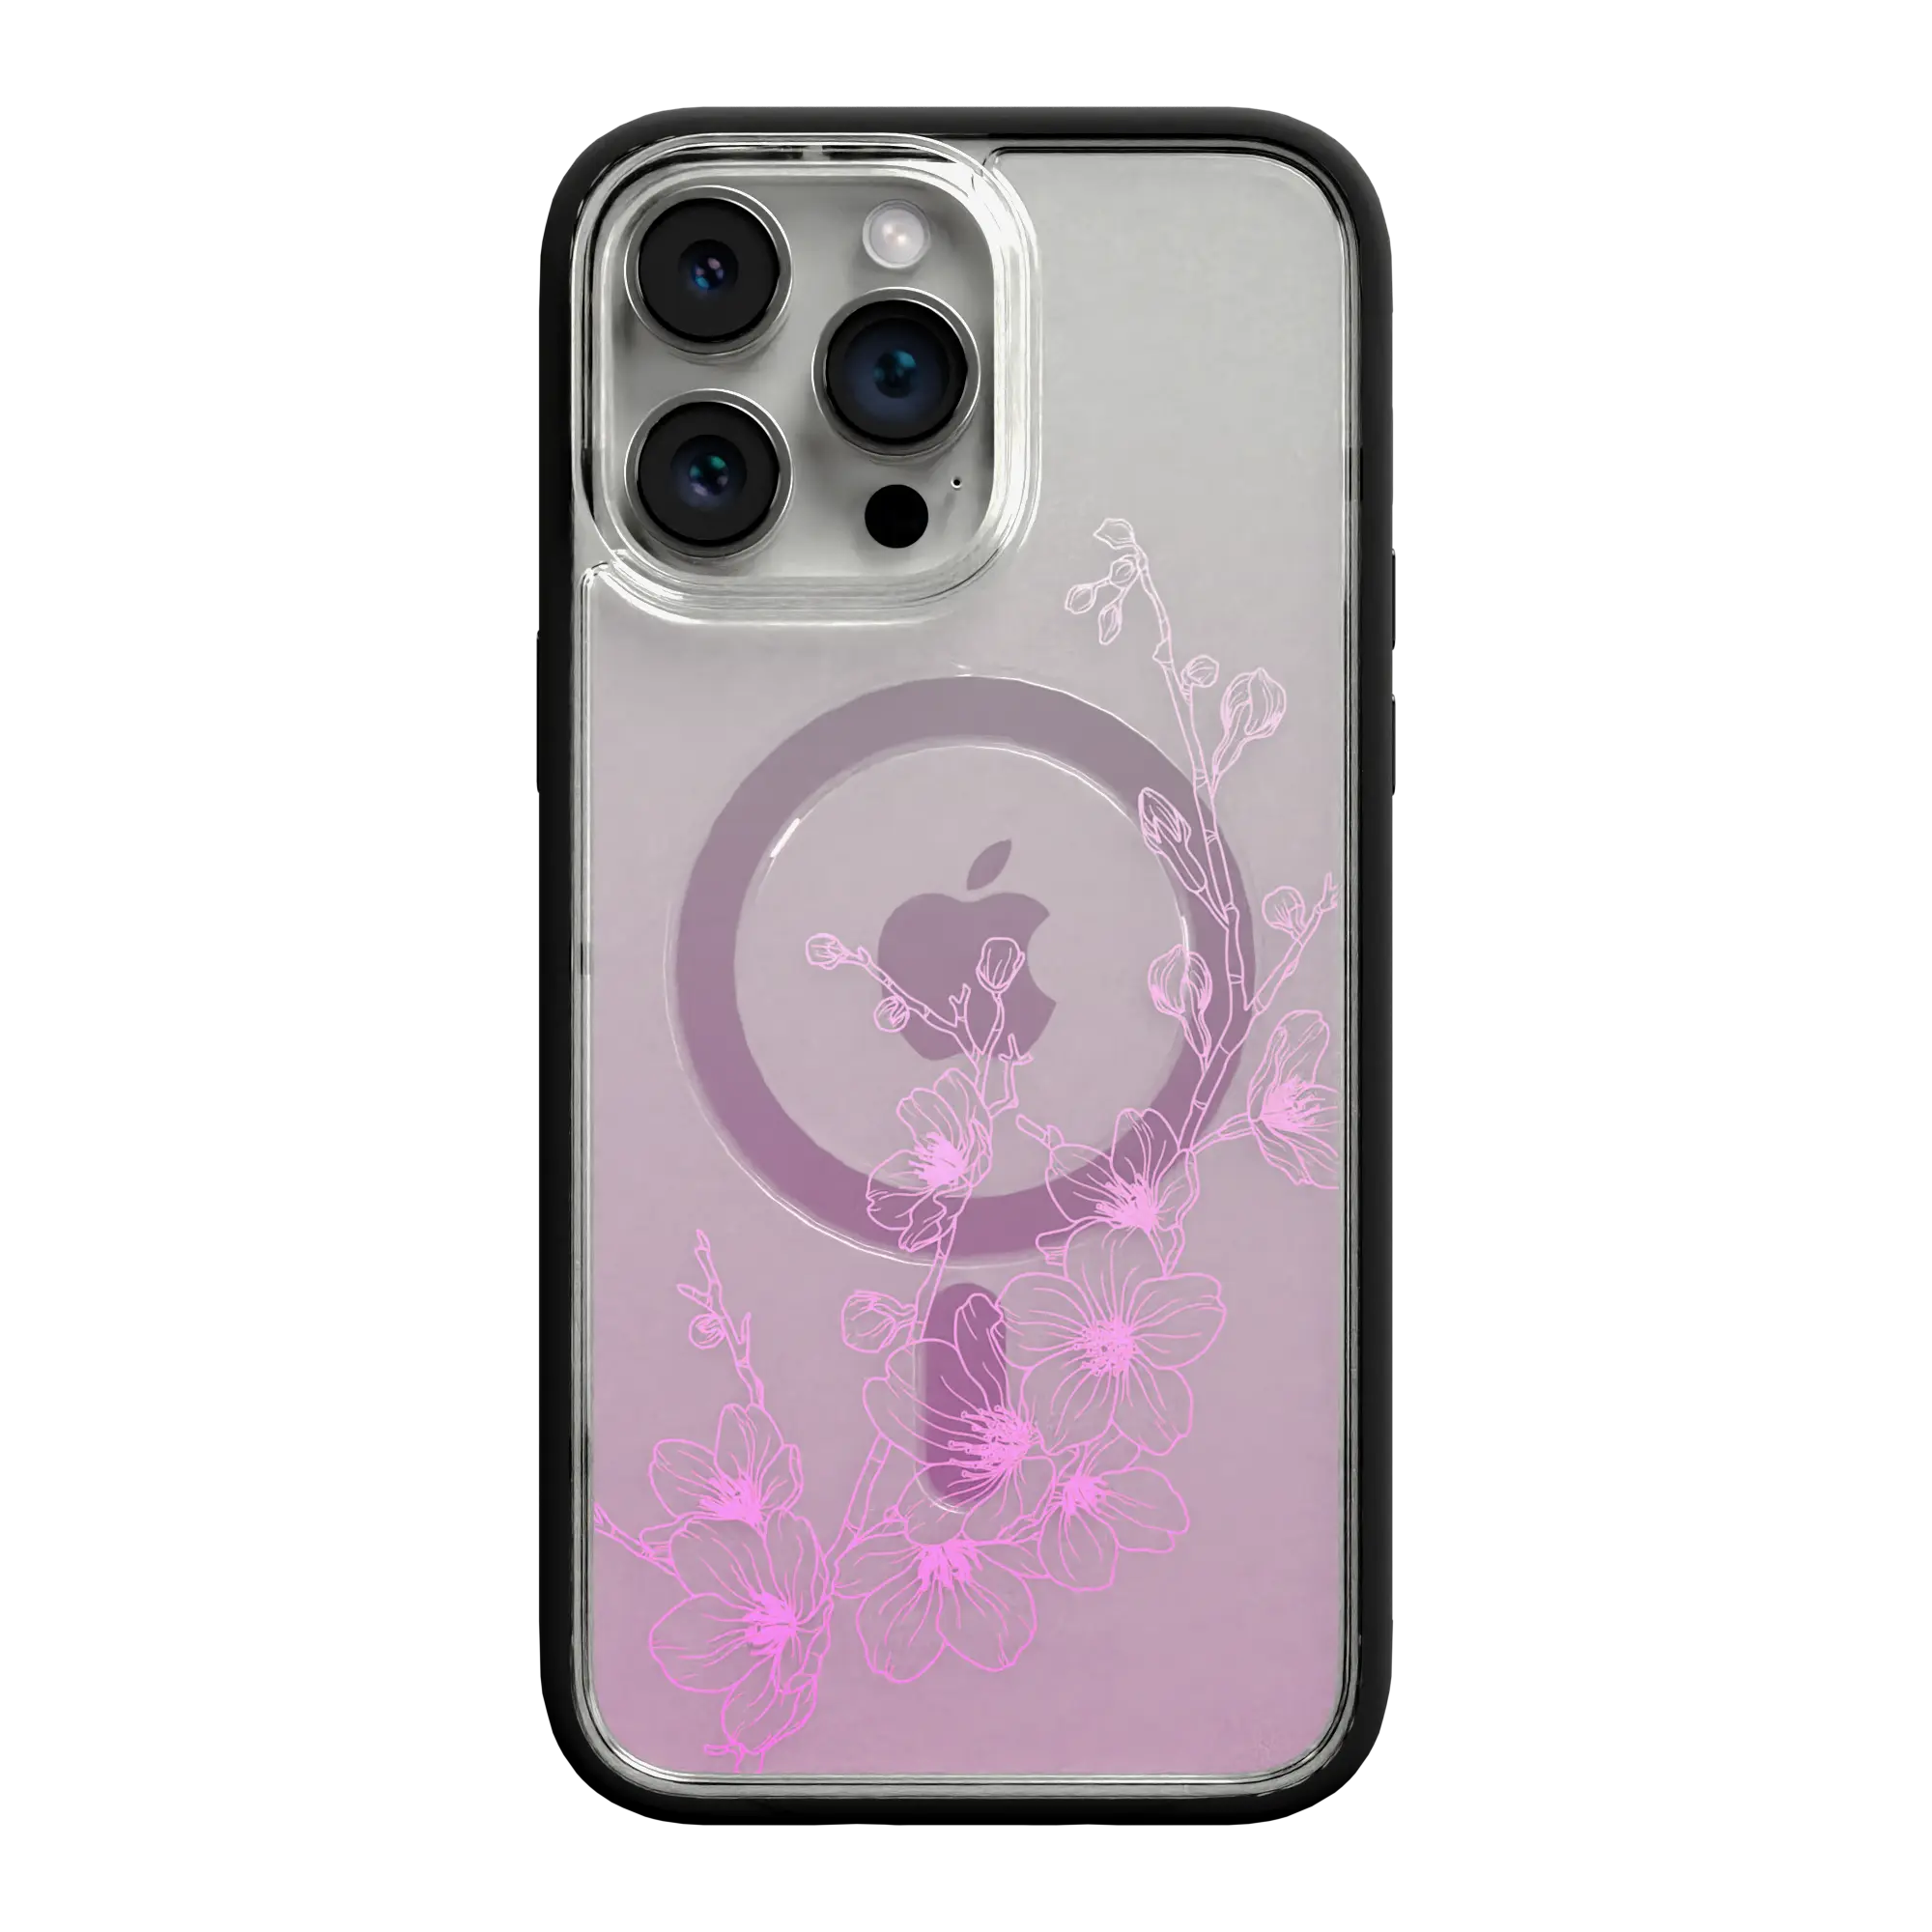 Apple-iPhone-12-Pro-Max-Crystal-Clear Ballet Blush | Protective MagSafe Case | Ombre Bouquet Collection for Apple iPhone 12 Series cellhelmet cellhelmet